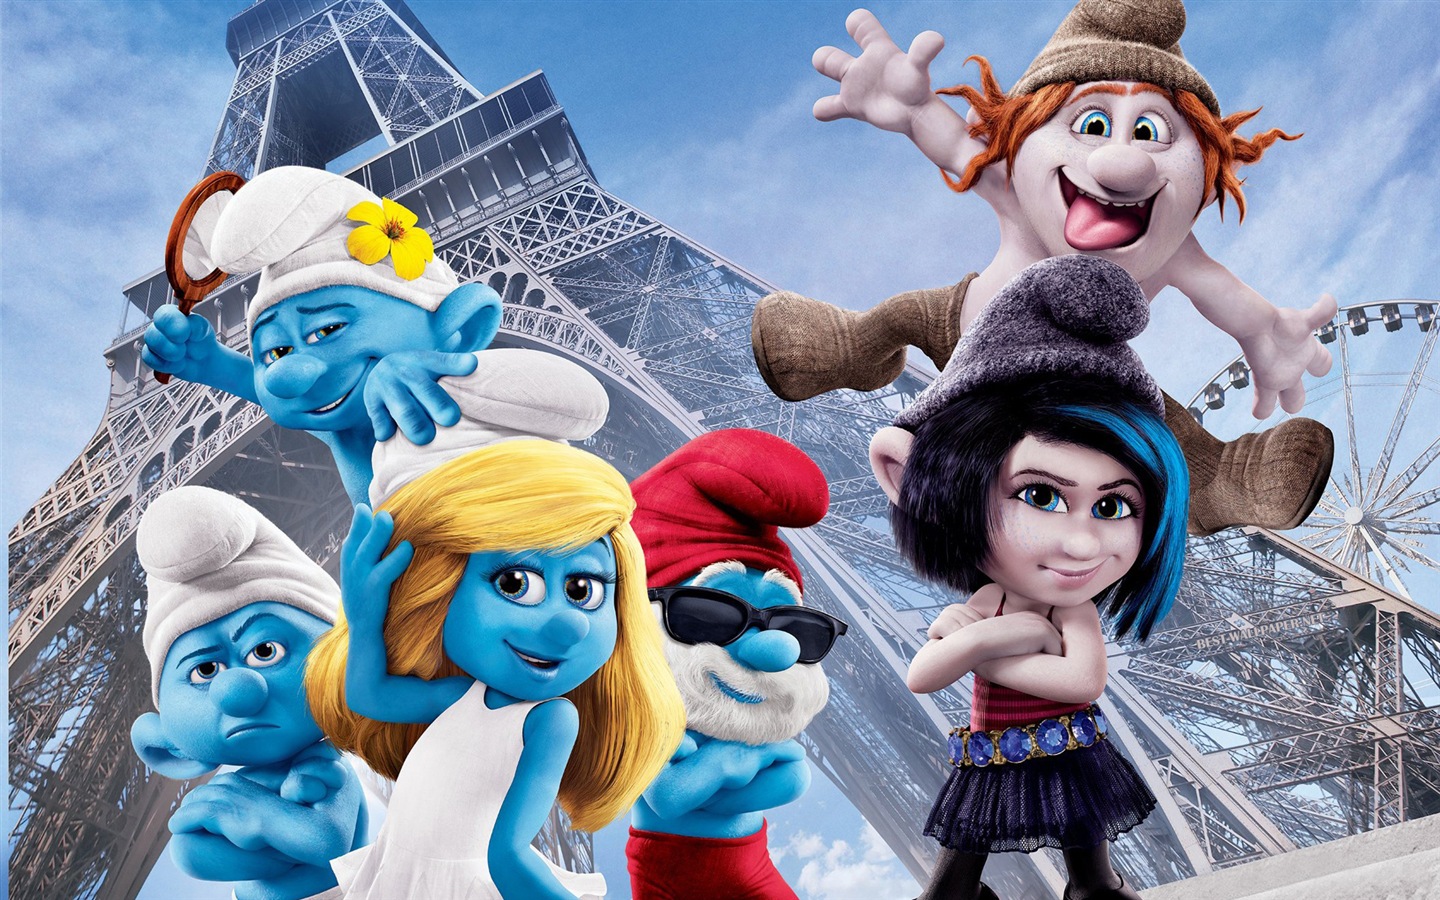 The Smurfs 2 HD movie wallpapers #1 - 1440x900